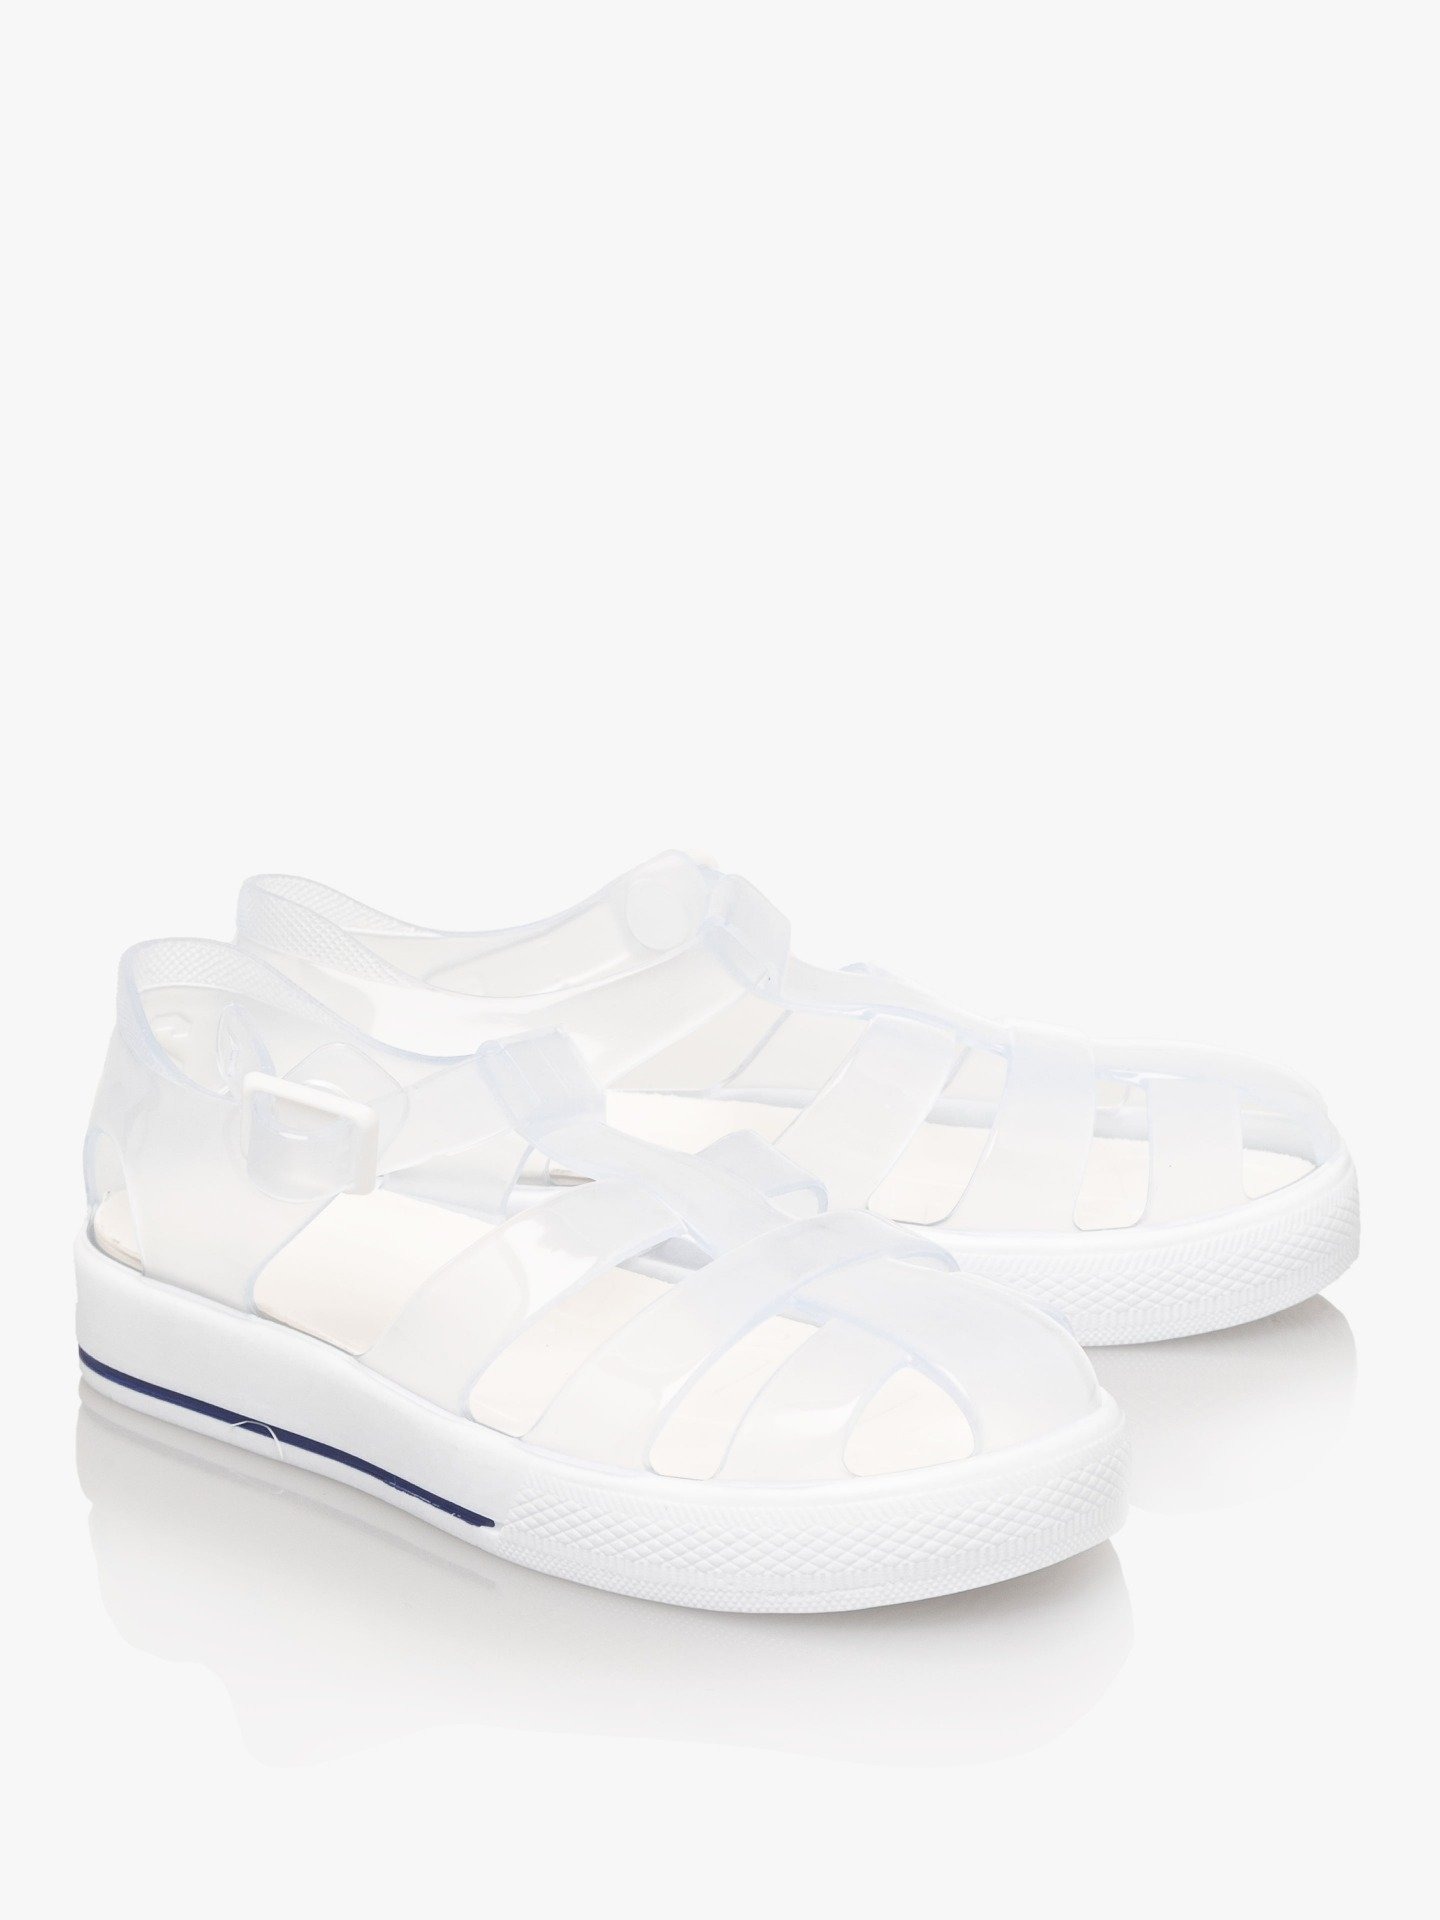 Clear Igor Popper Jelly Sandals | Base